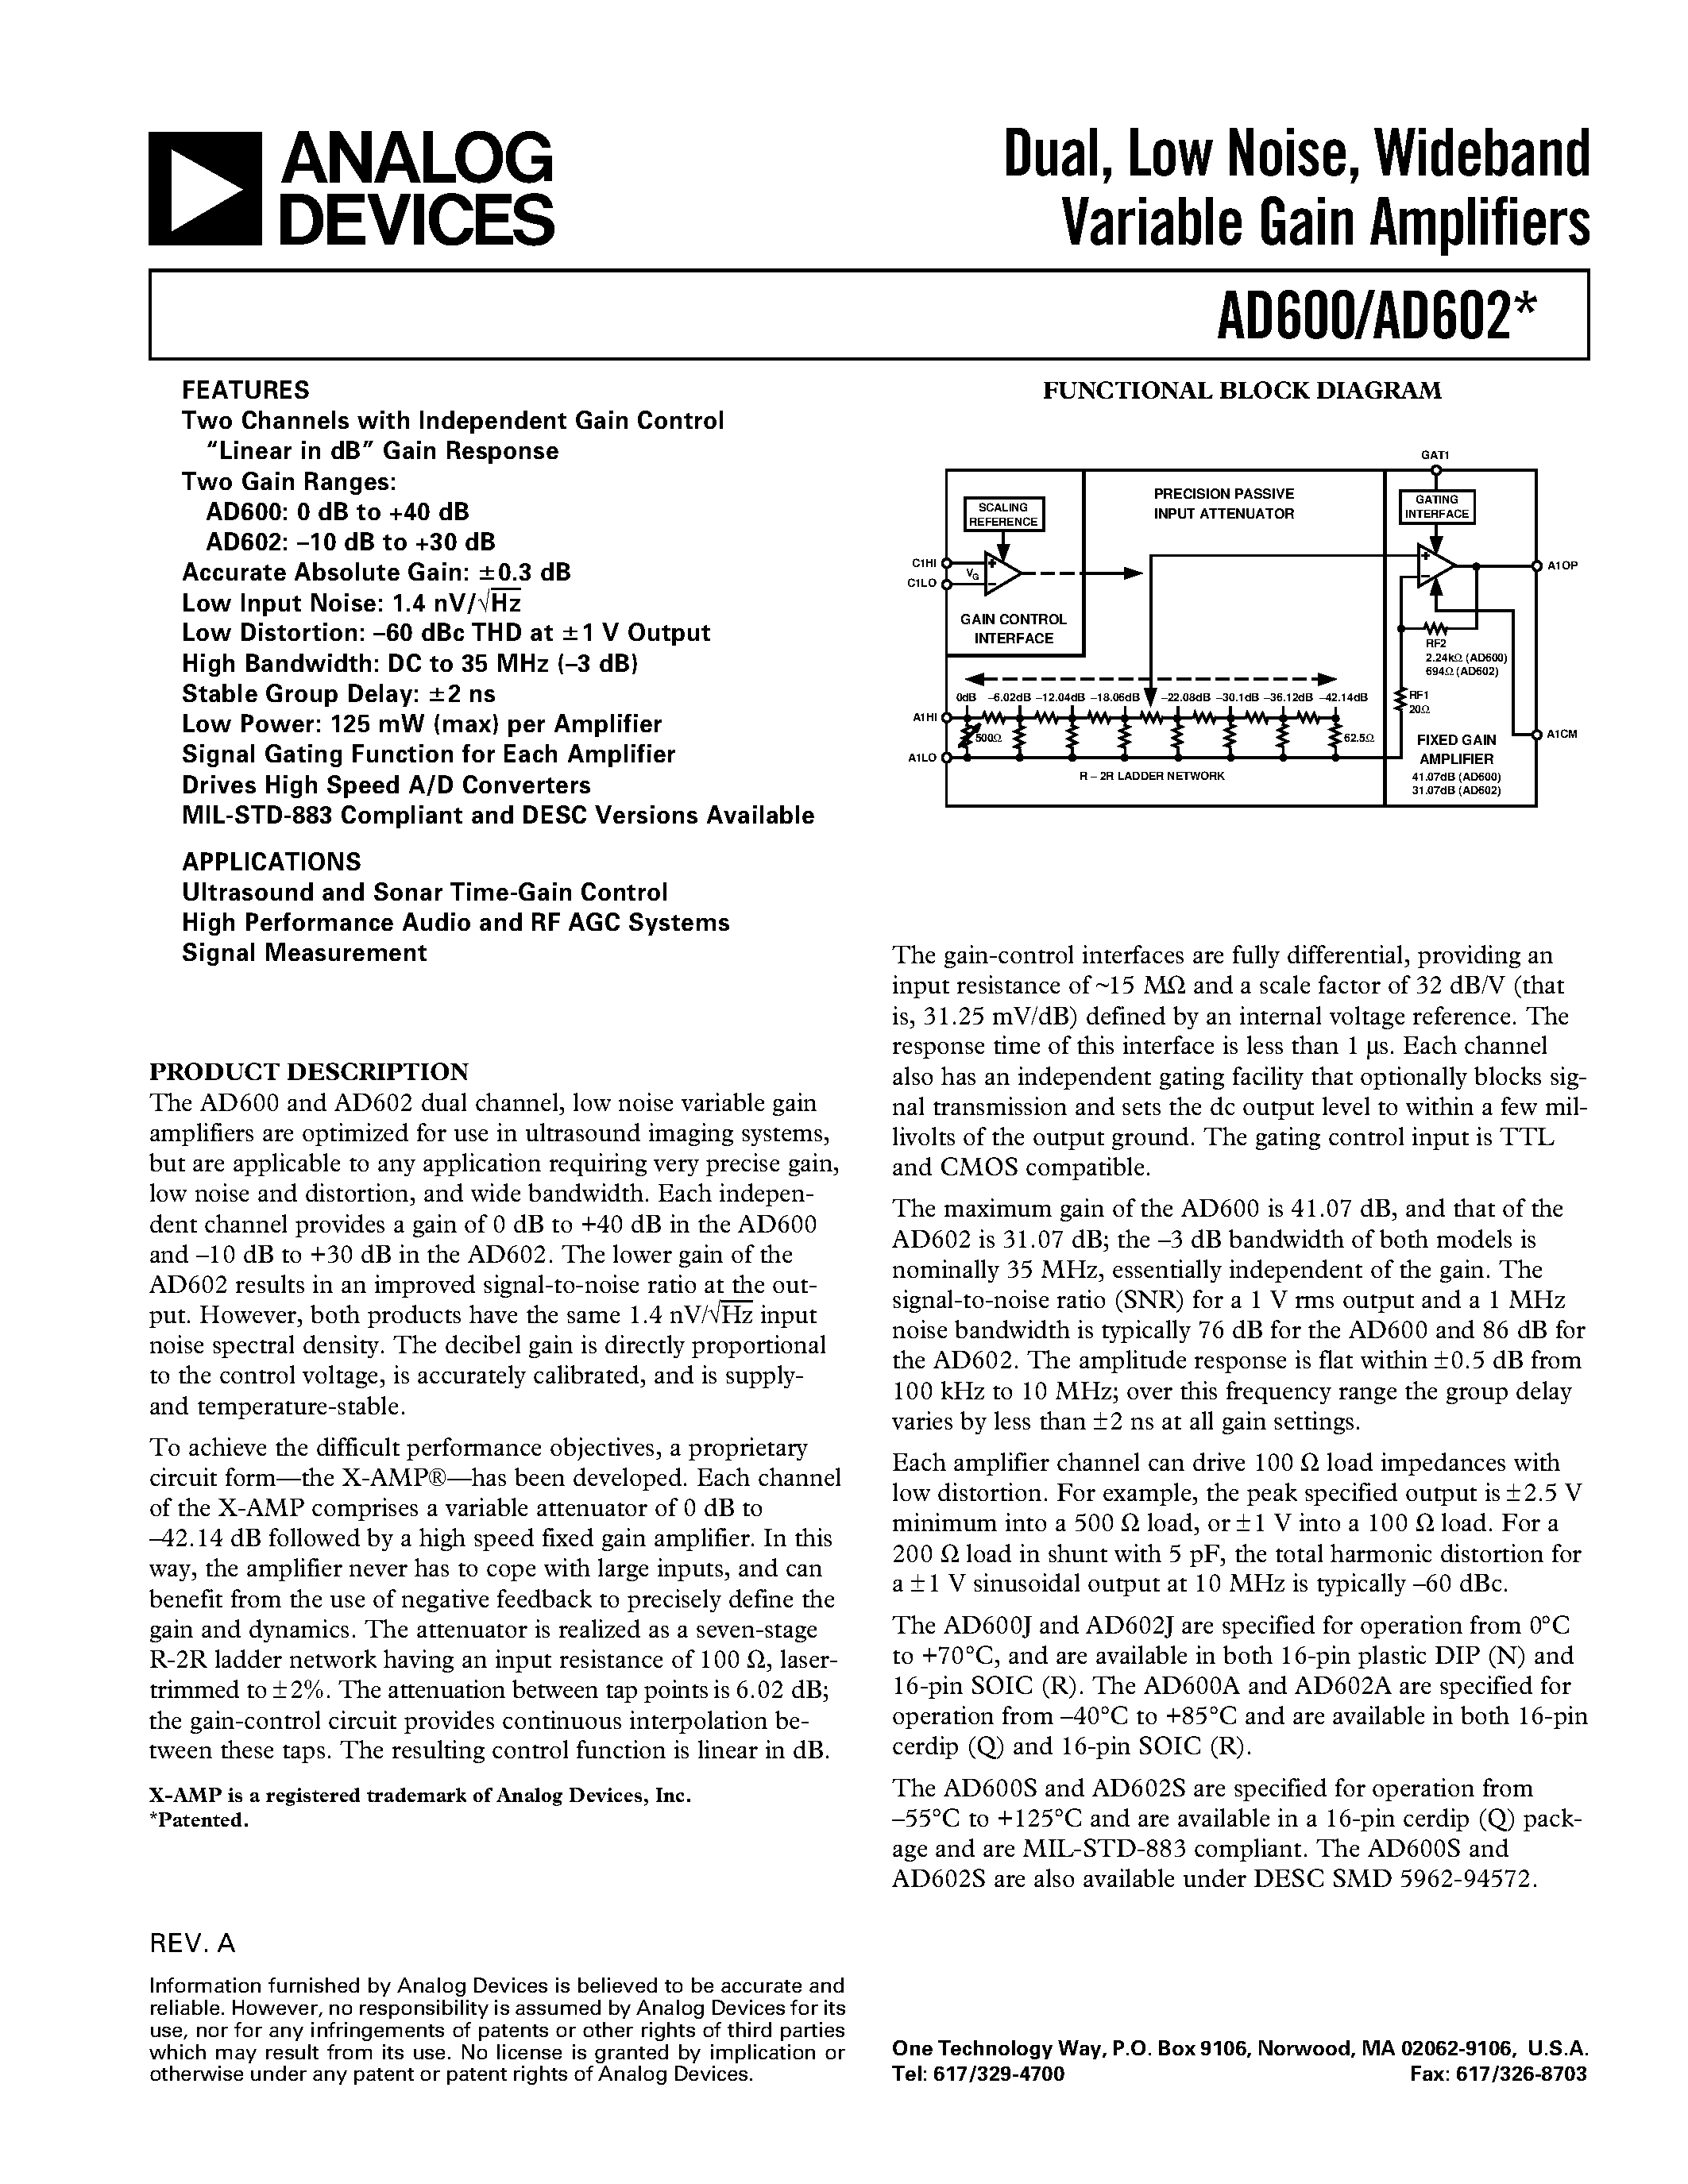 Datasheet AD600J - Dual/ Low Noise/ Wideband Variable Gain Amplifiers page 1